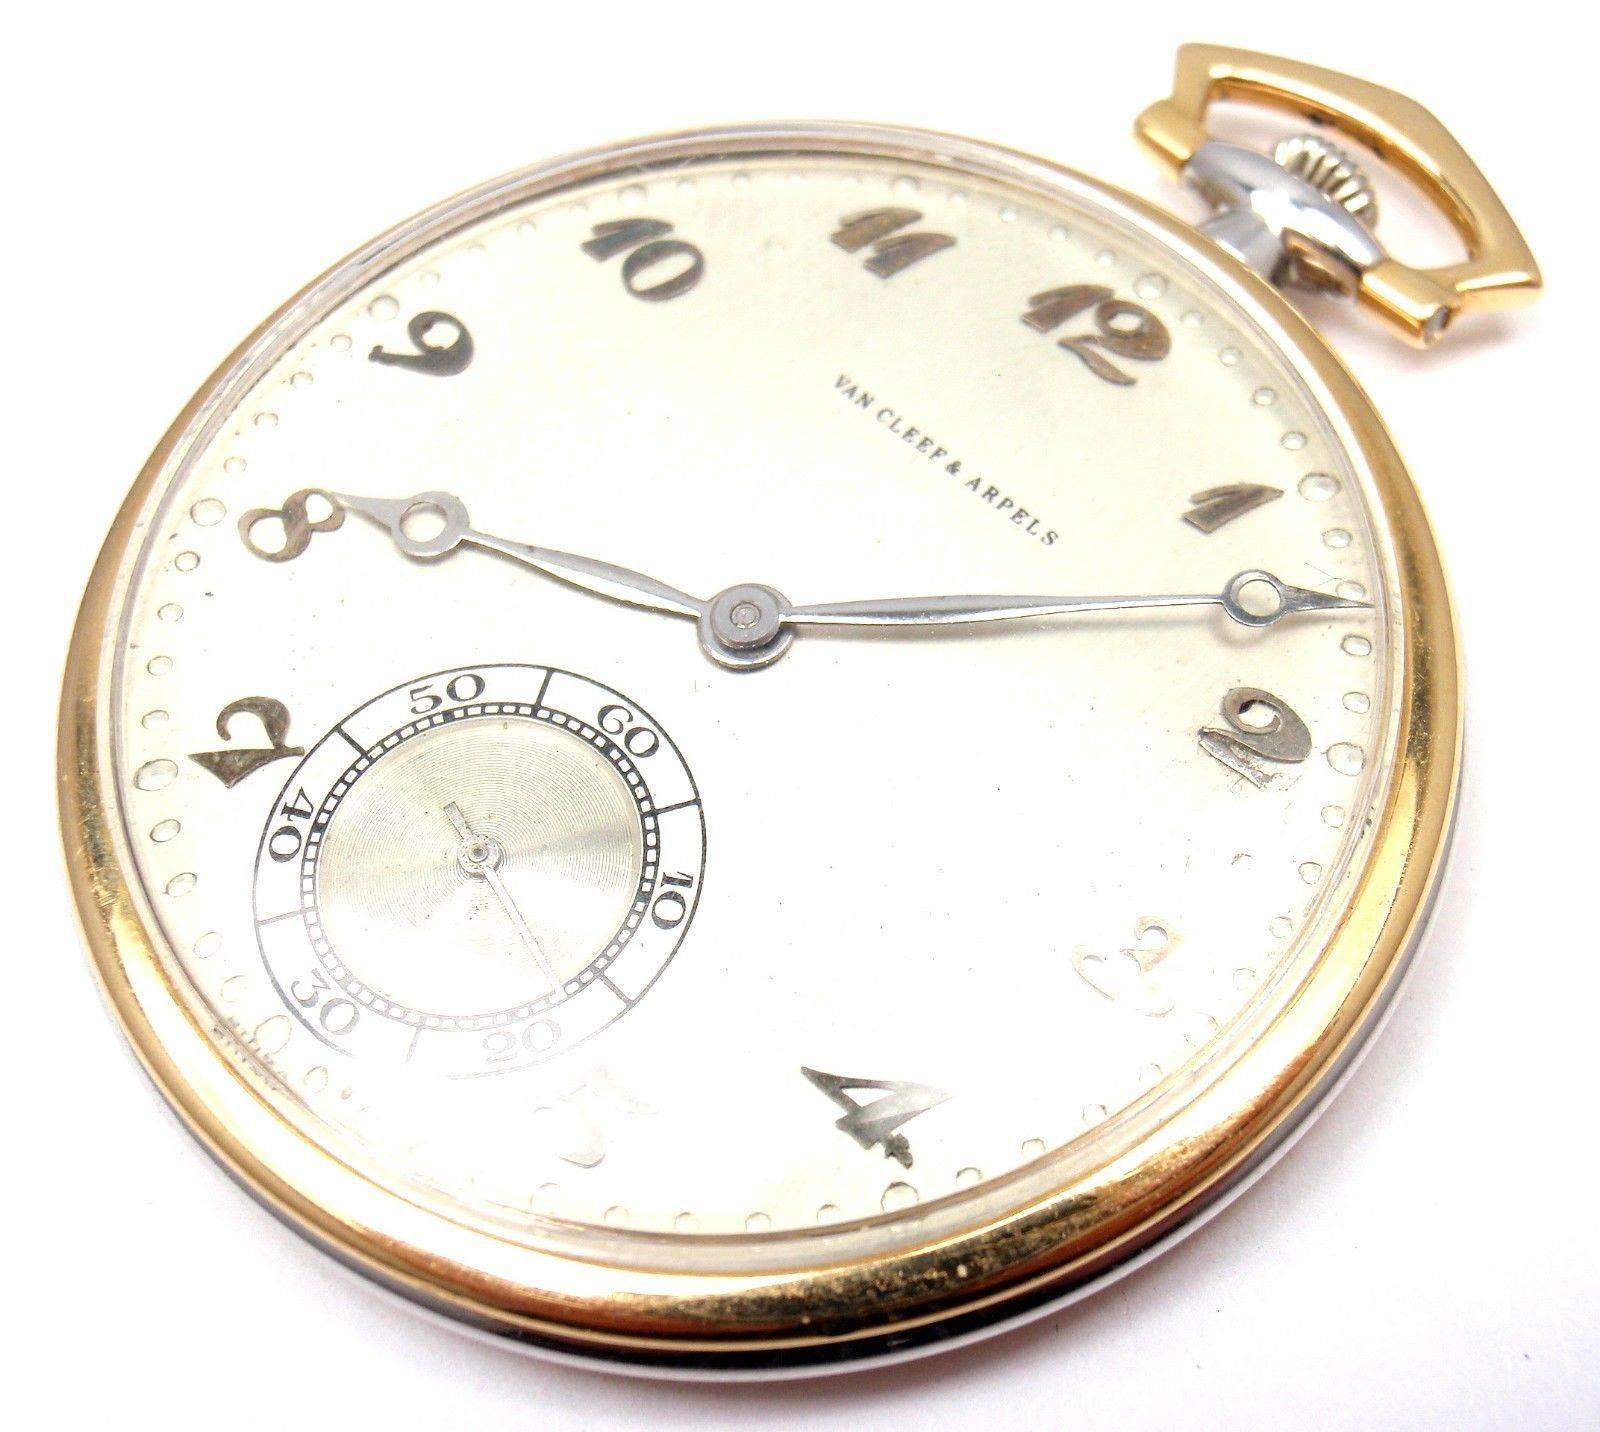 18k yellow gold and white gold pocket watch by Tissot Locle for Van Cleef & Arpels.
This watch works great, fully functional. 

Details:
Case Size: 45.5mm
Weight: 52.5 grams
Dial: Brushed White
Movement: Manual 16 jewels
Stamped Hallmarks: